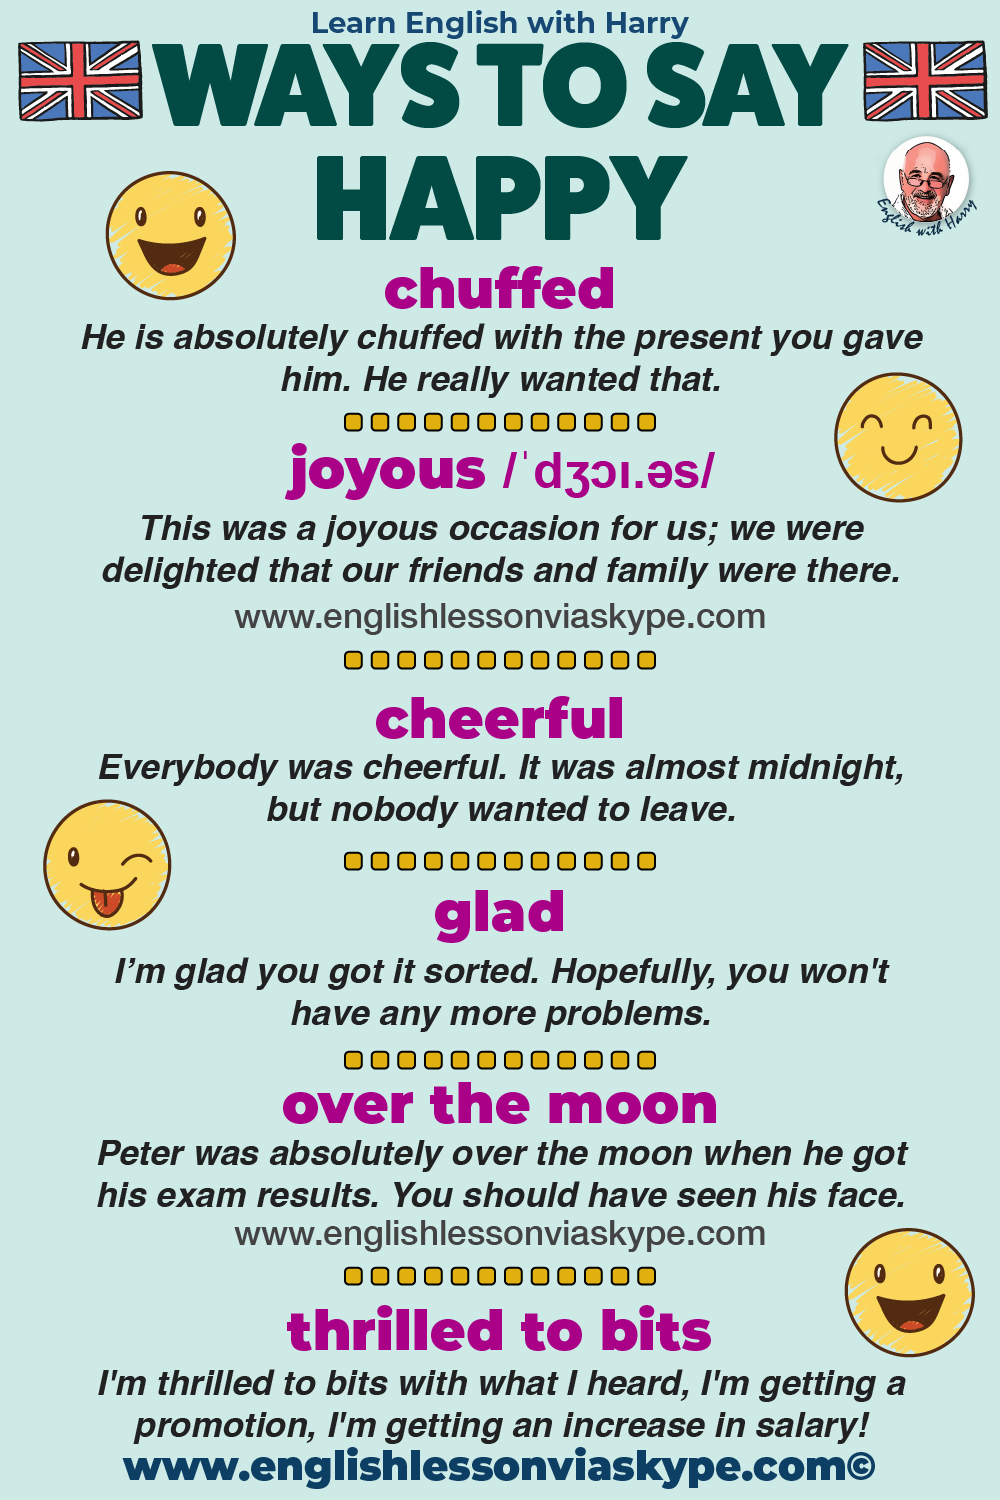 How to say happy in English. Ways to say happy. Advanced English lessons on Zoom and Skype. #learnenglish